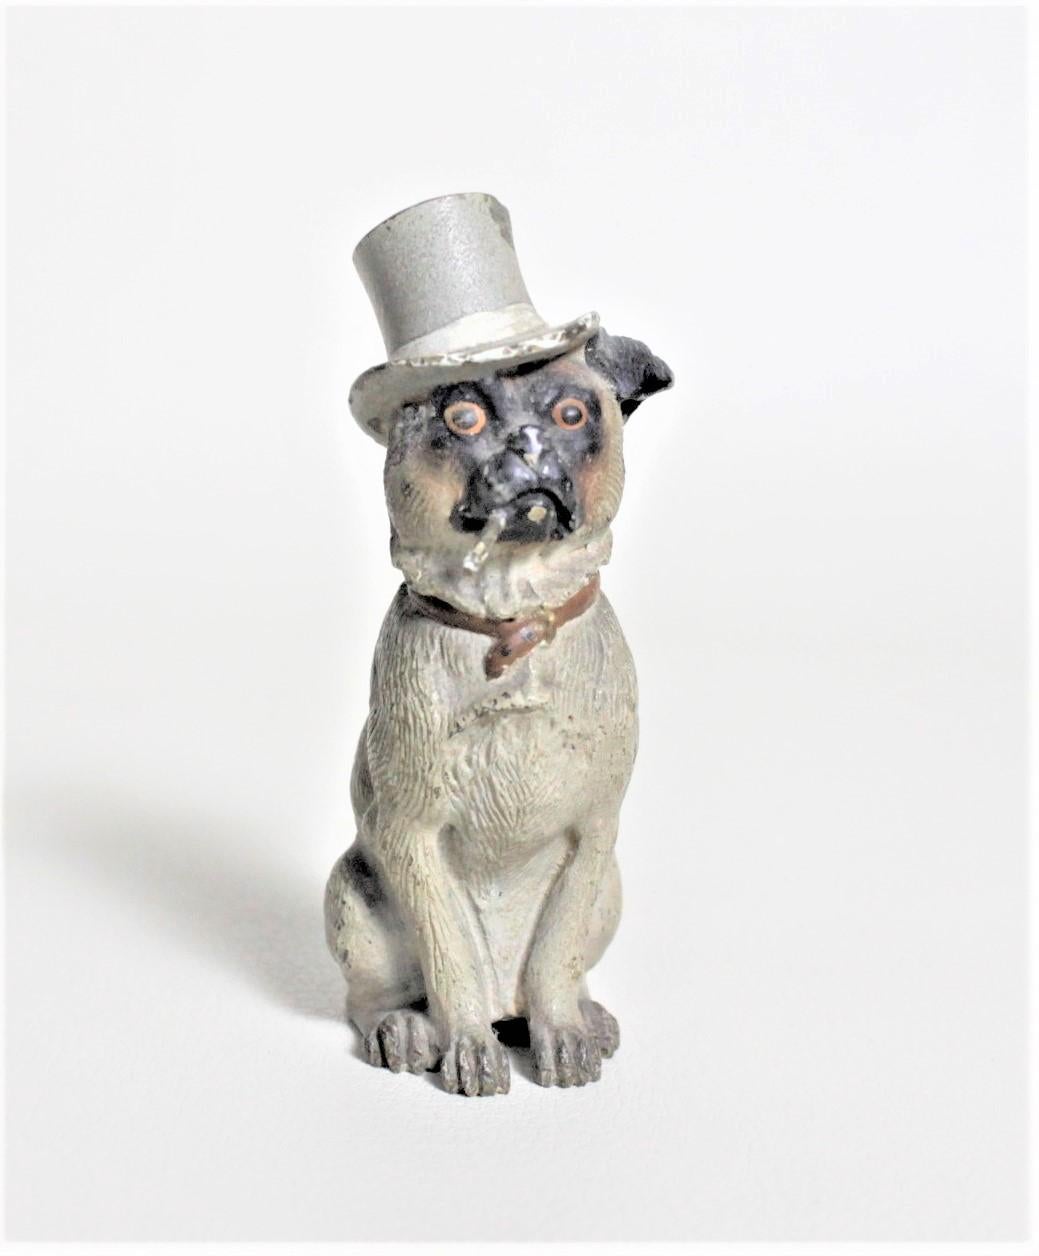 This antique cast and cold-painted bronze sculpture is unsigned but presumed to have been made in Austria in circa 1900. This well executed cast bronze study depicts a seated dog wearing a top hat and smoking a cigarette. The detail of the casting